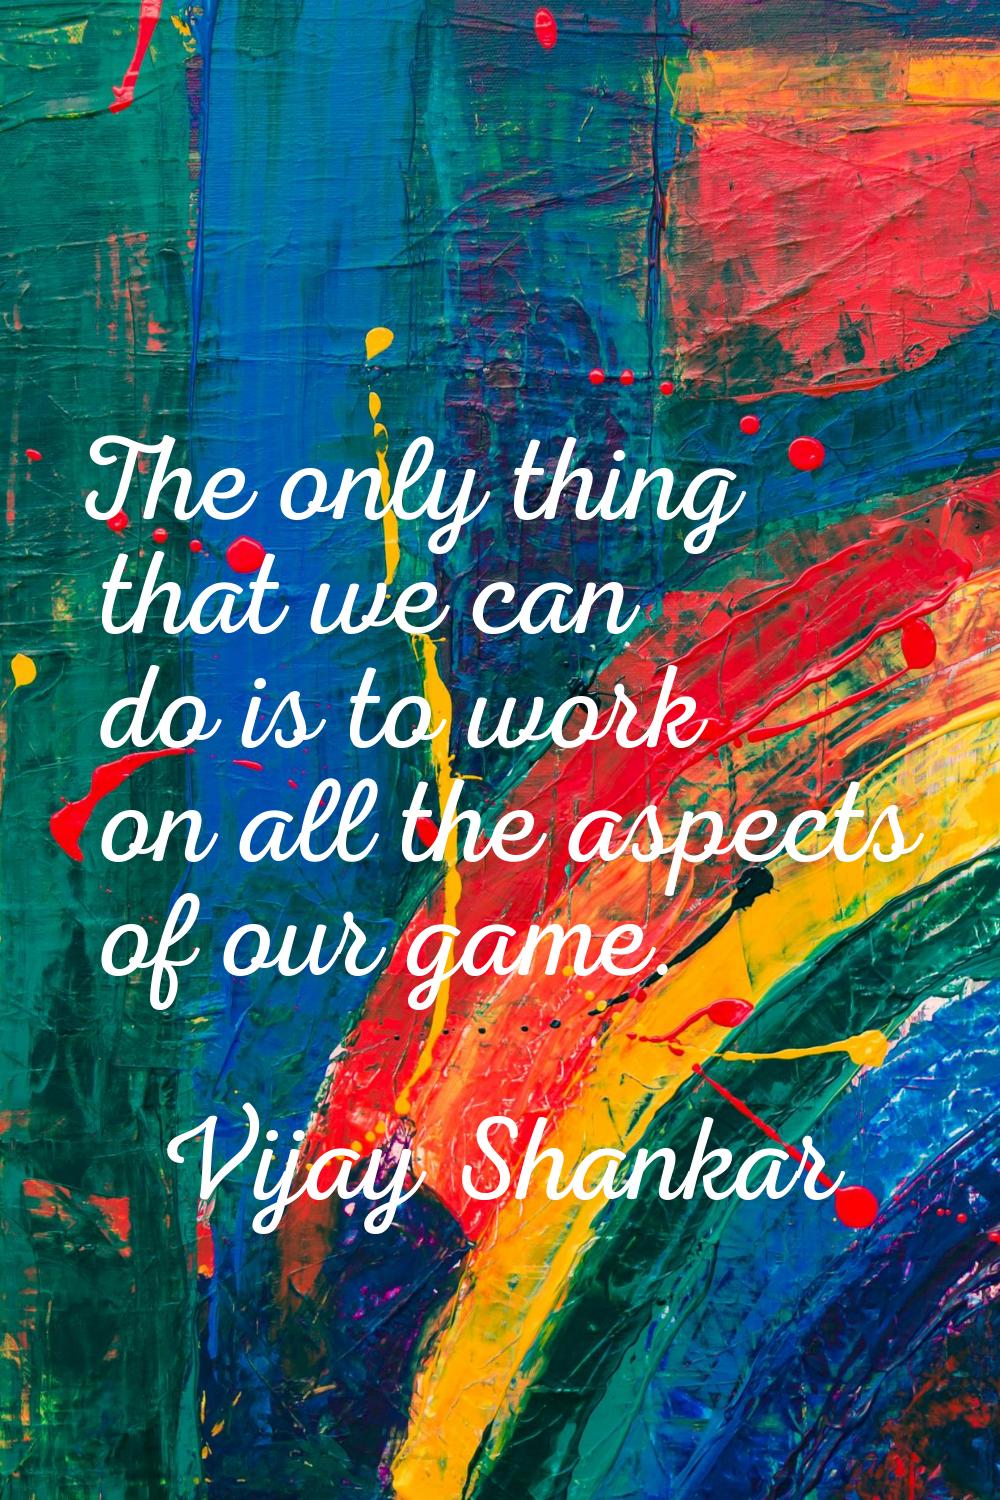 The only thing that we can do is to work on all the aspects of our game.